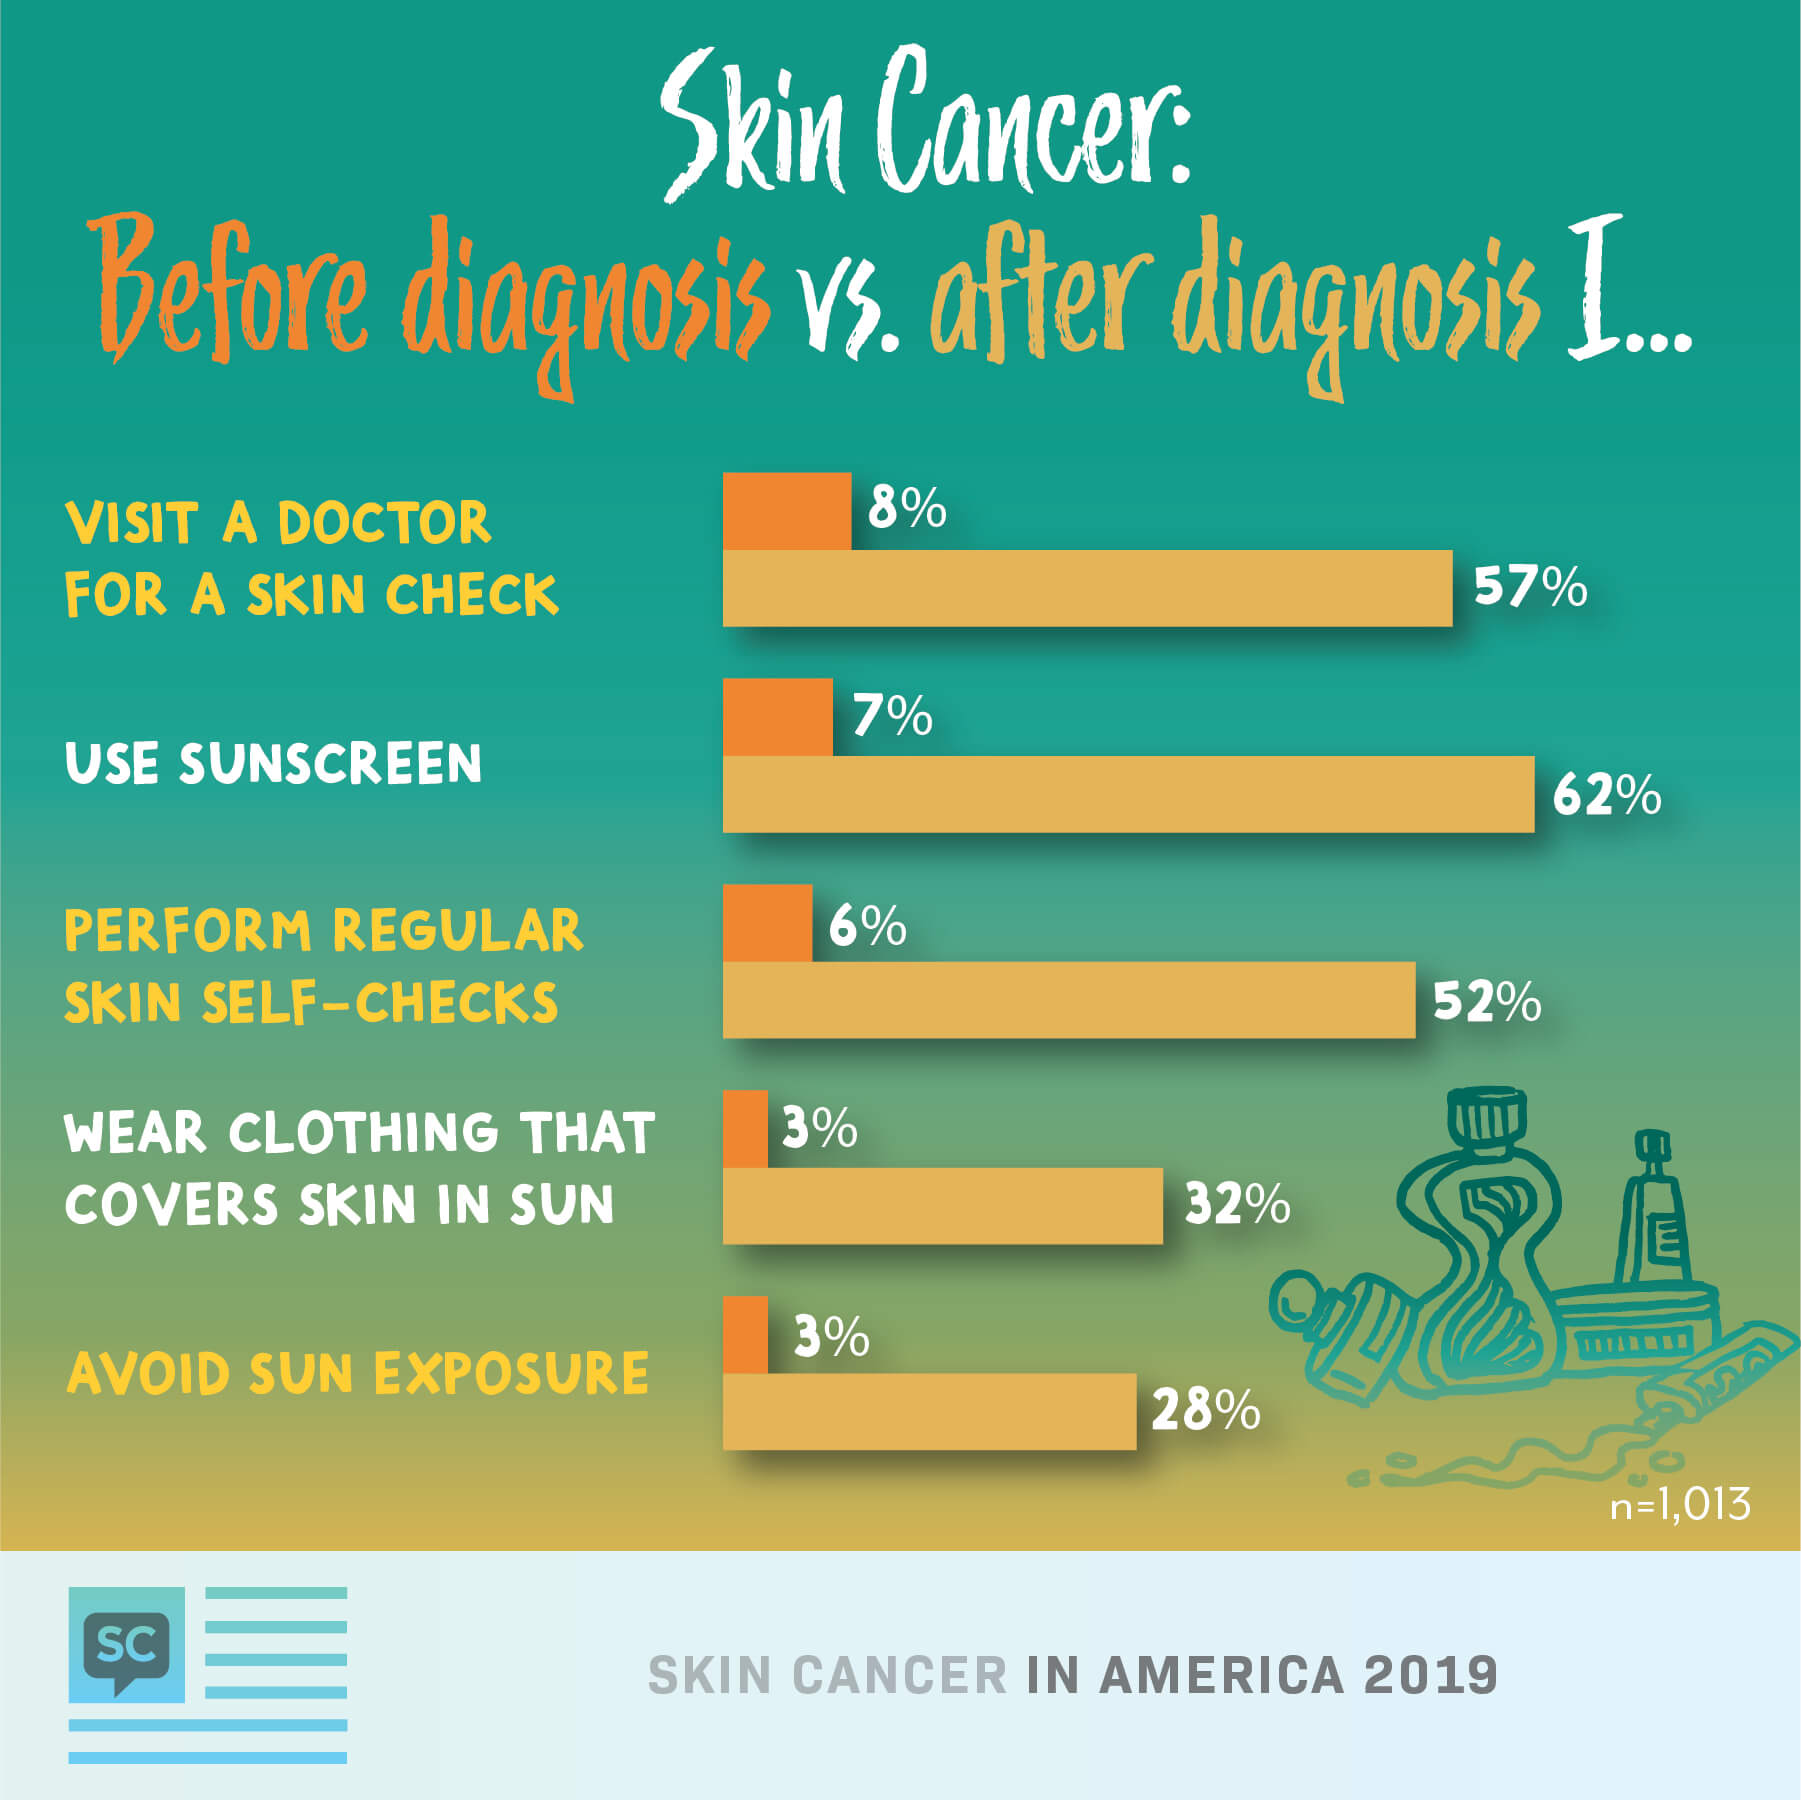 Before:after diagnosis: doctor check 8:57%, use sunscreen 7:62%, self-check 6:52%, clothing that covers 3:32%, avoid sun 3:28%